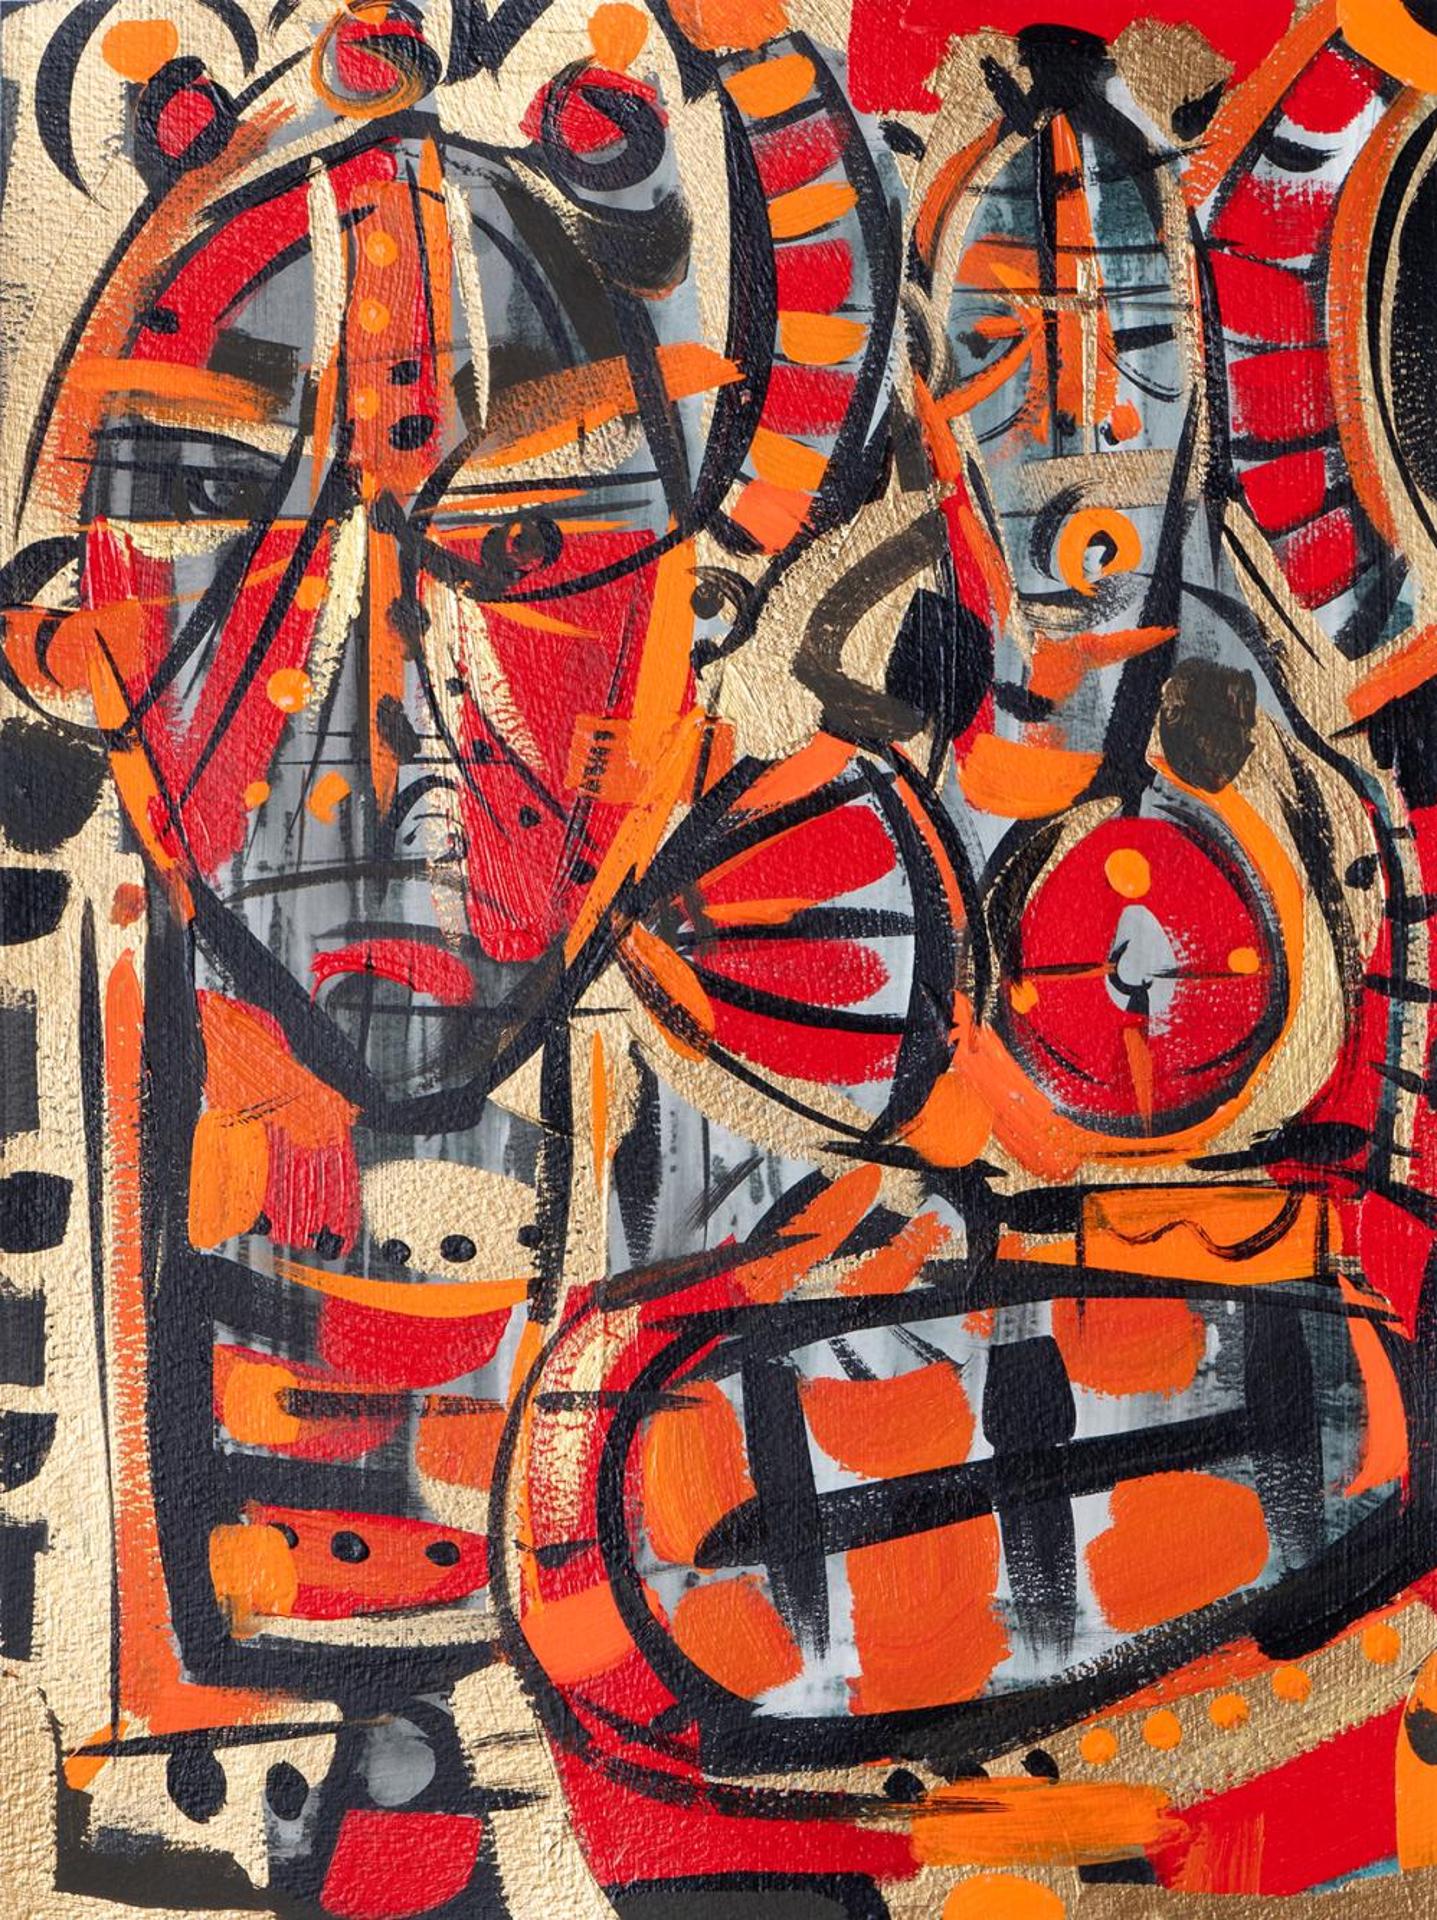 Shawn Skeir (1965) - Untitled - Faces (Orange and Red)